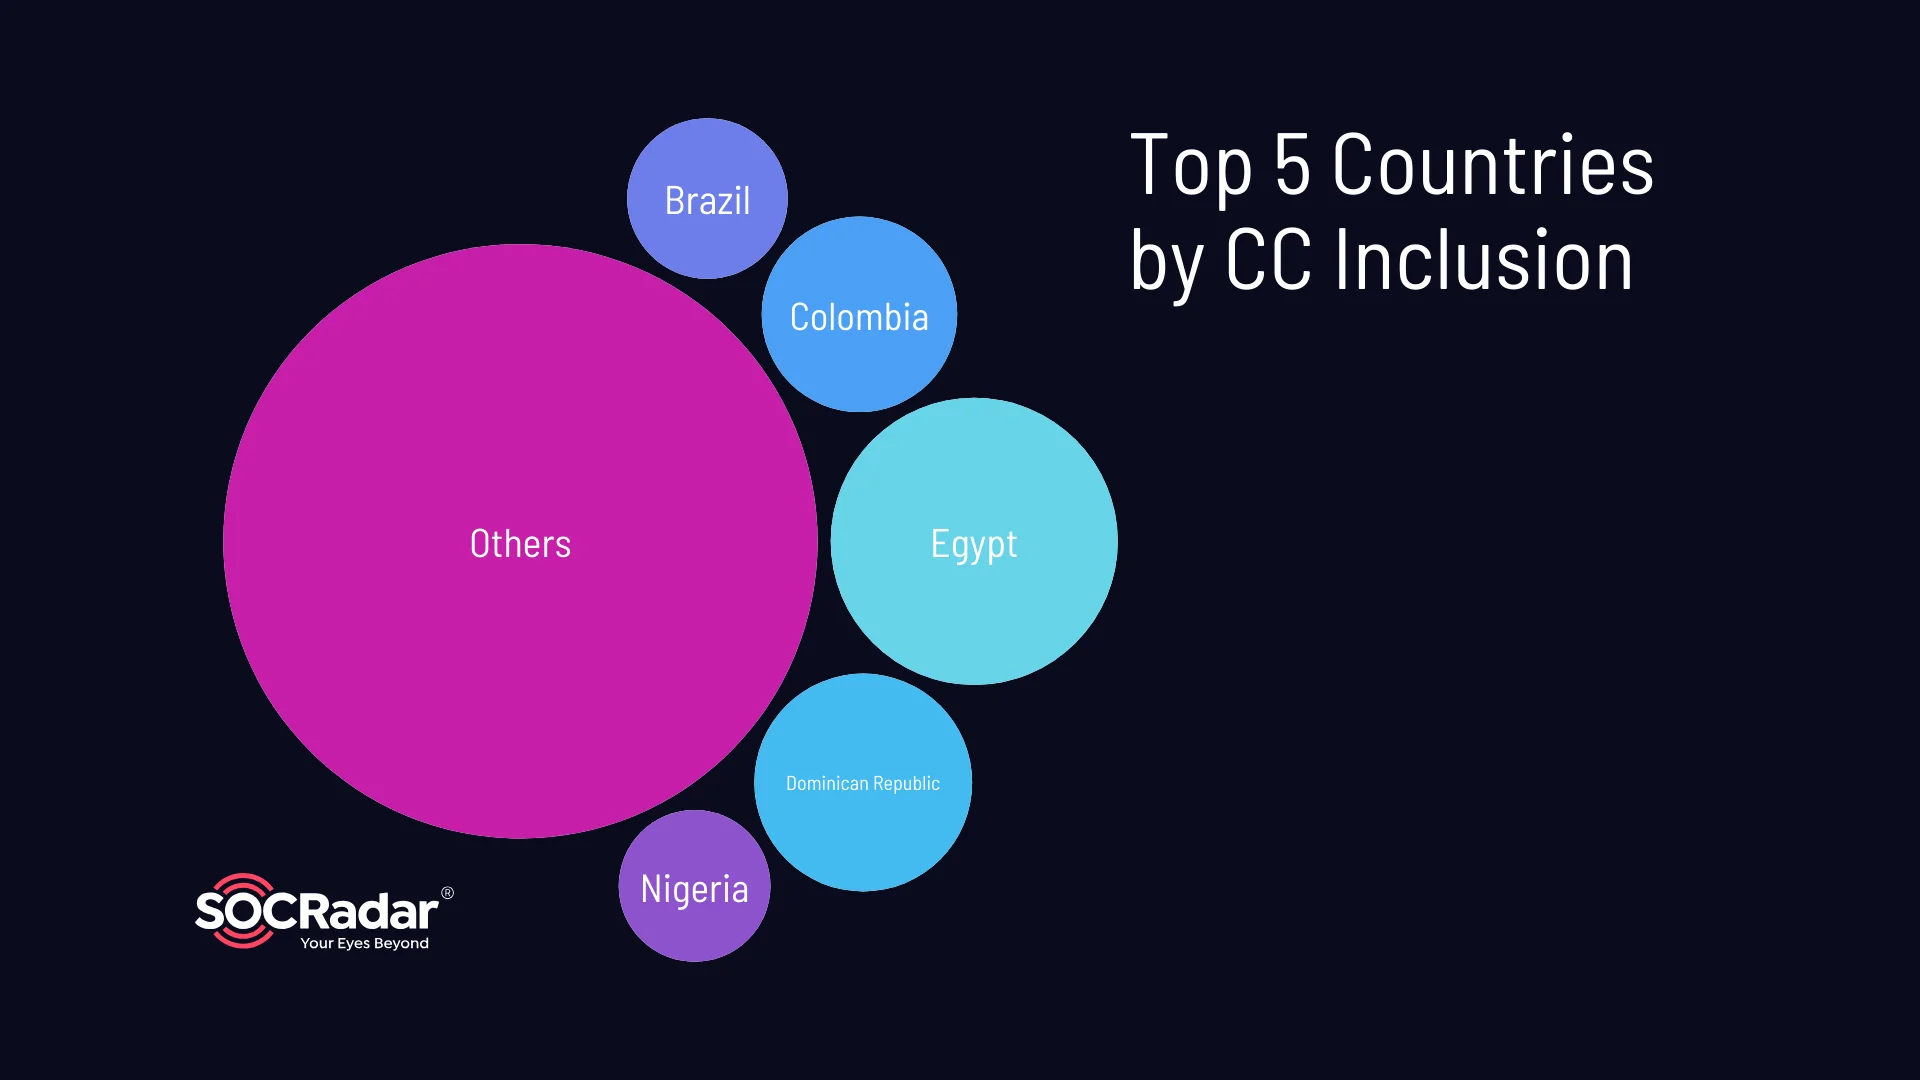 Top 5 countries by credit card information inclusion